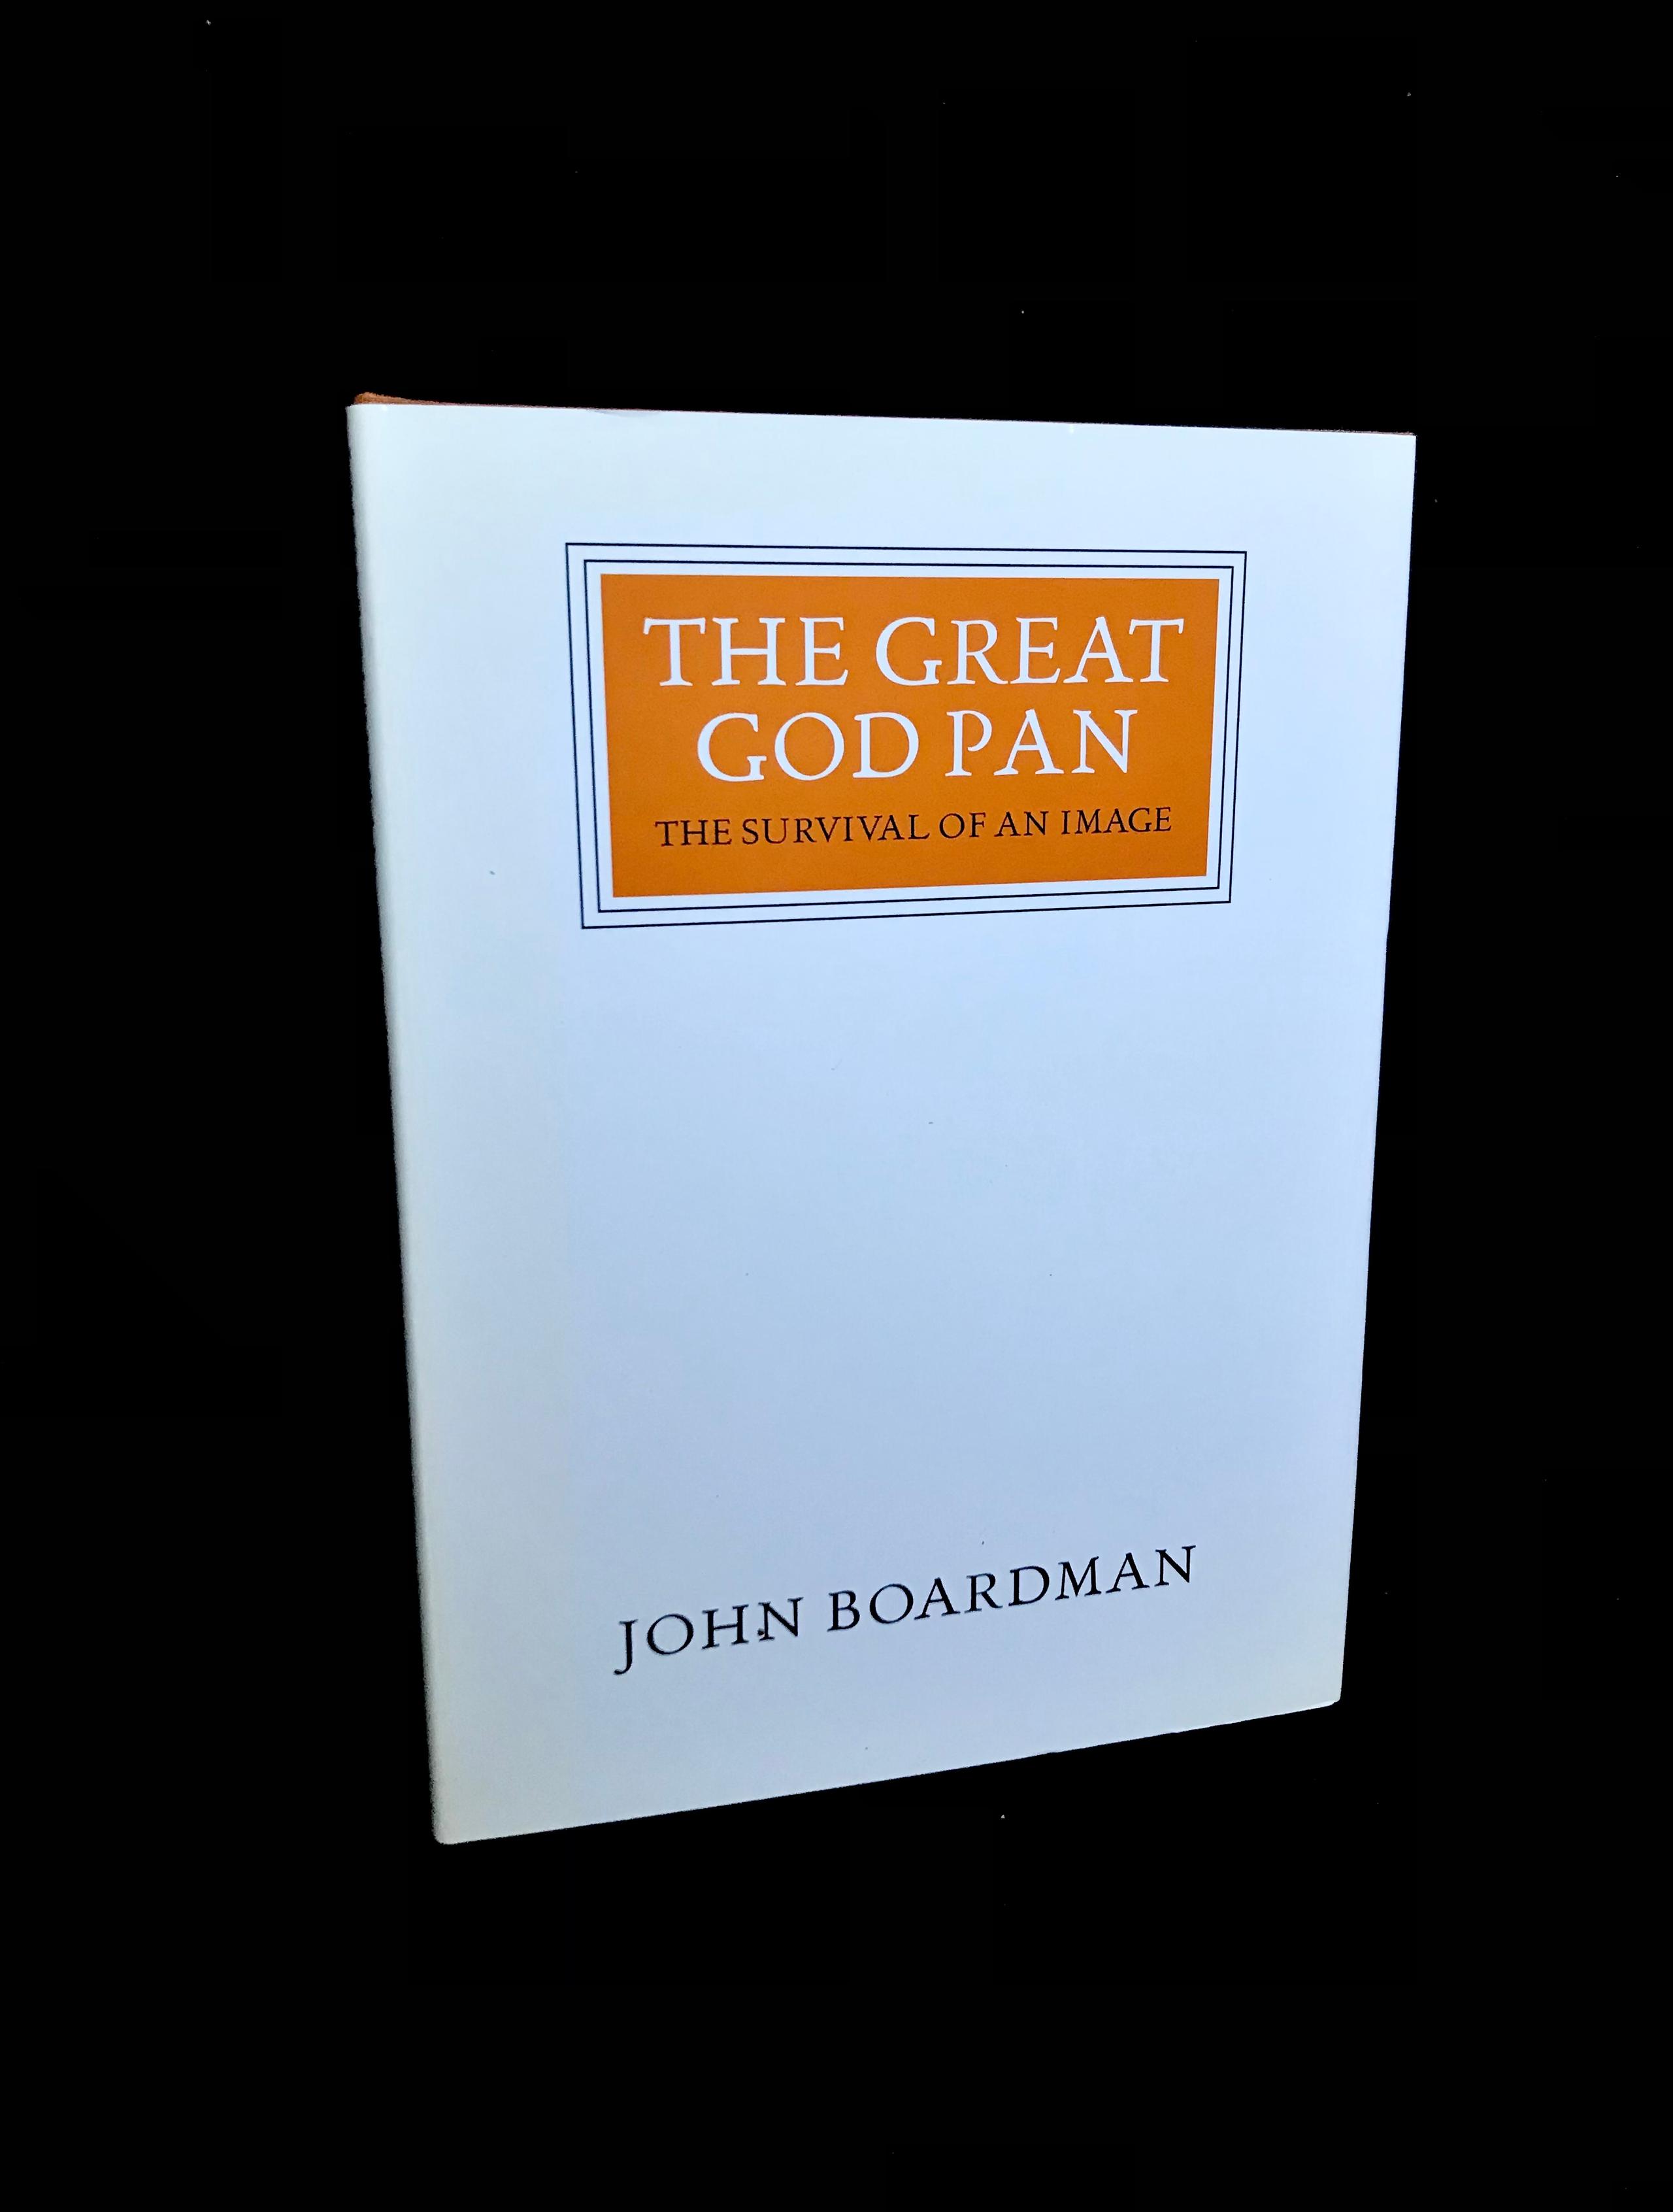 The Great God Pan: The Survival Of An Image by John Boardman